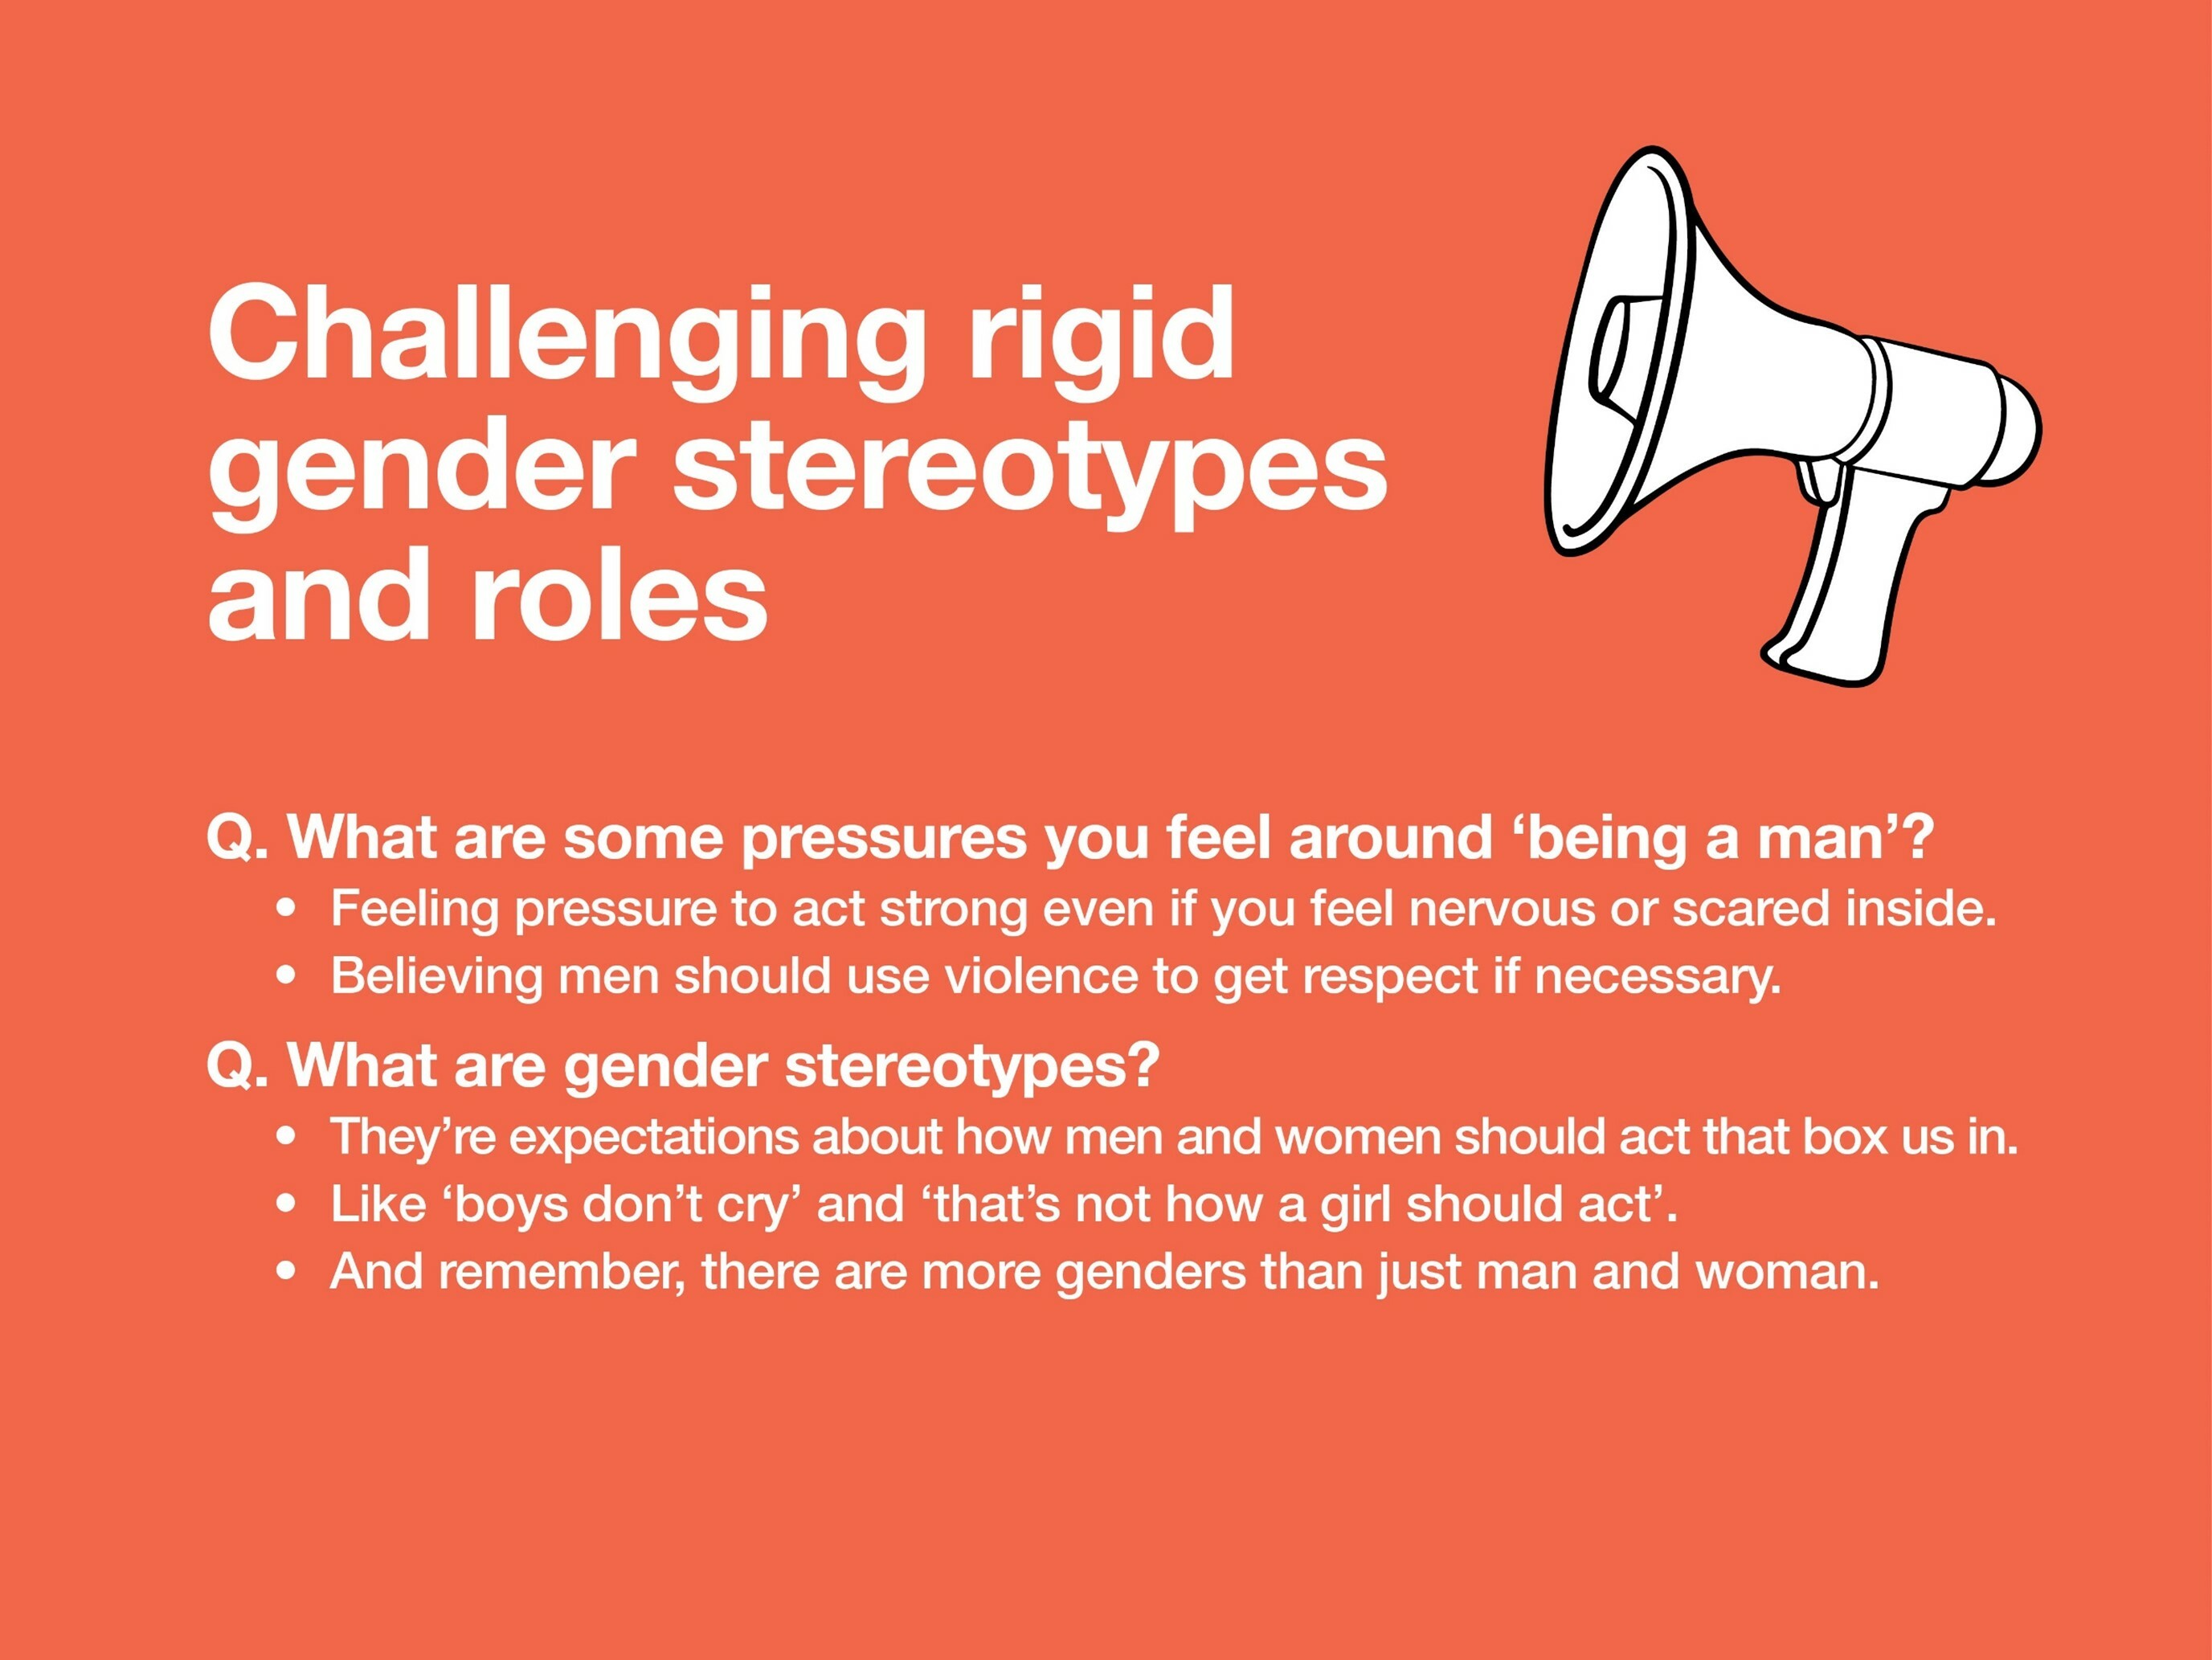 An infographic that covers questions and answers about Challenging rigid gender stereotypes and roles.